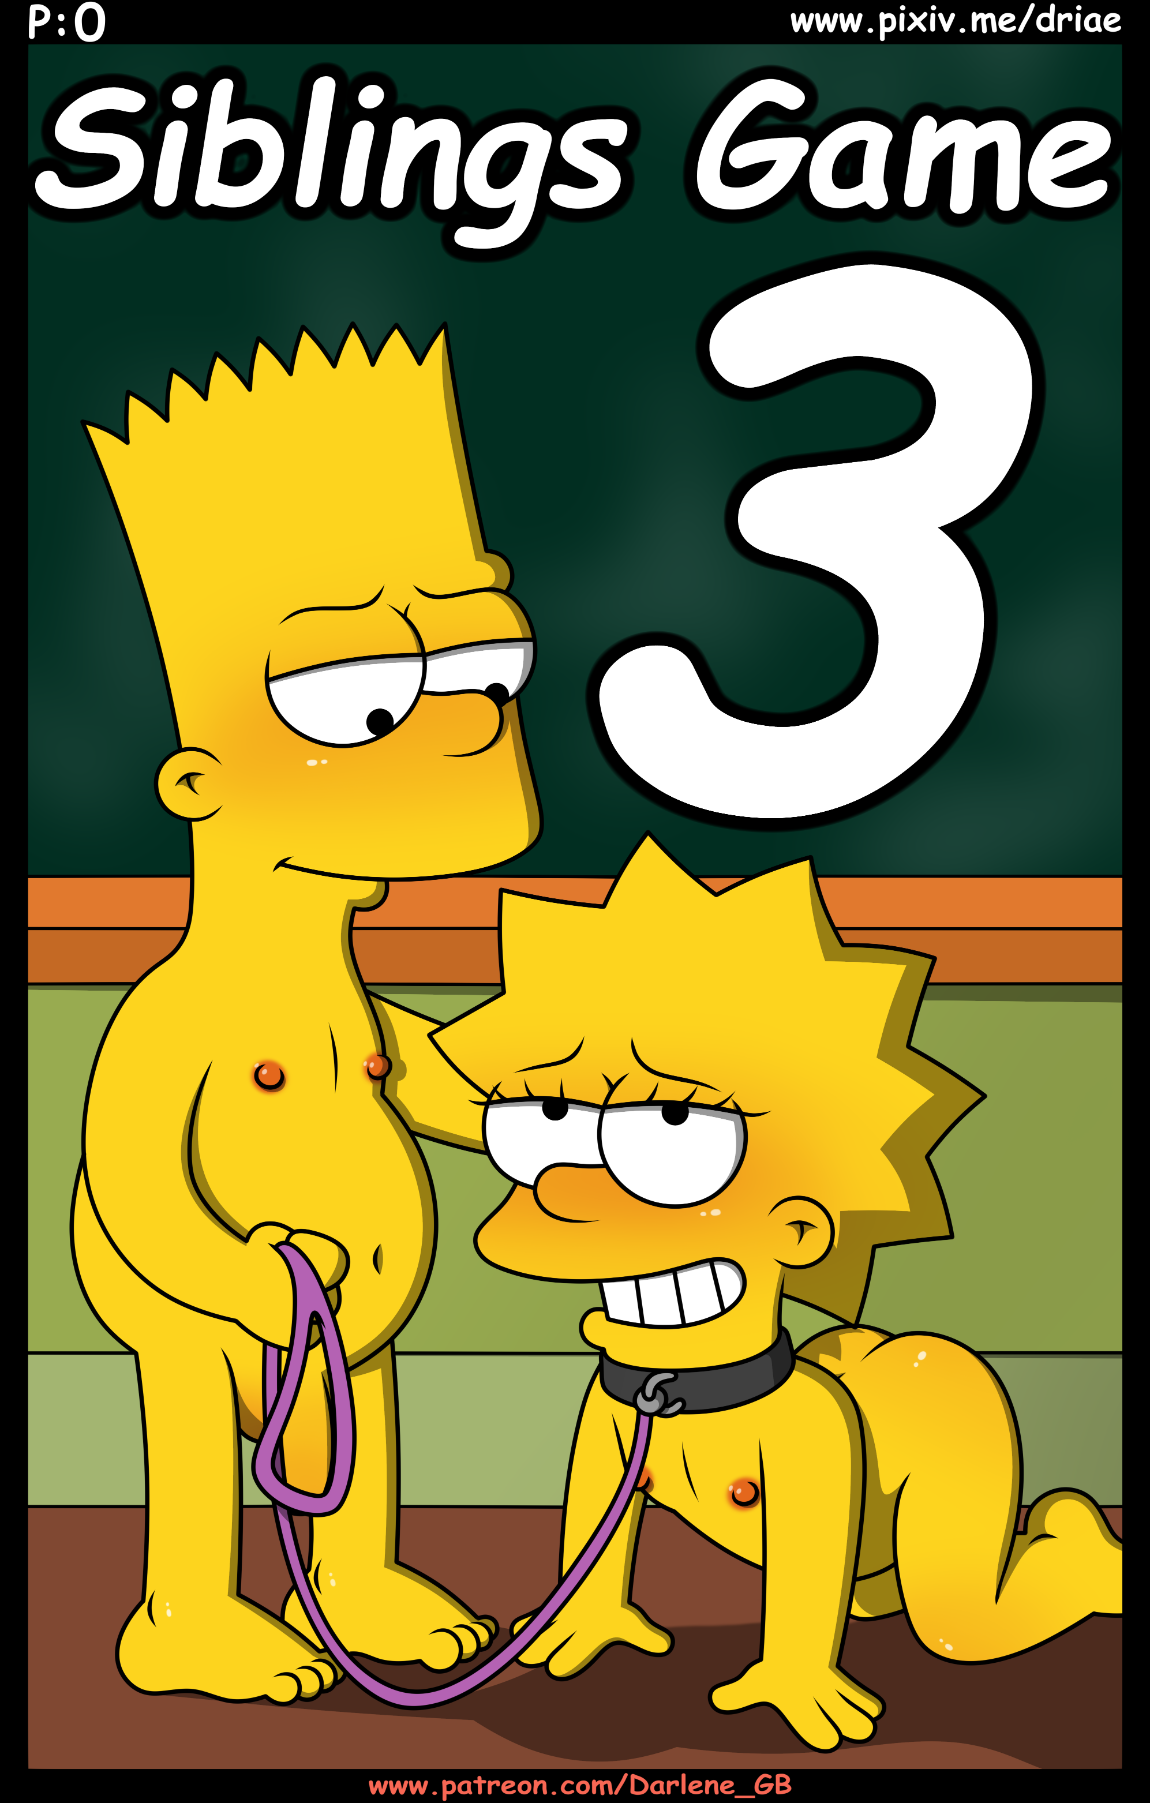 david willet recommends bart simpson sex game pic